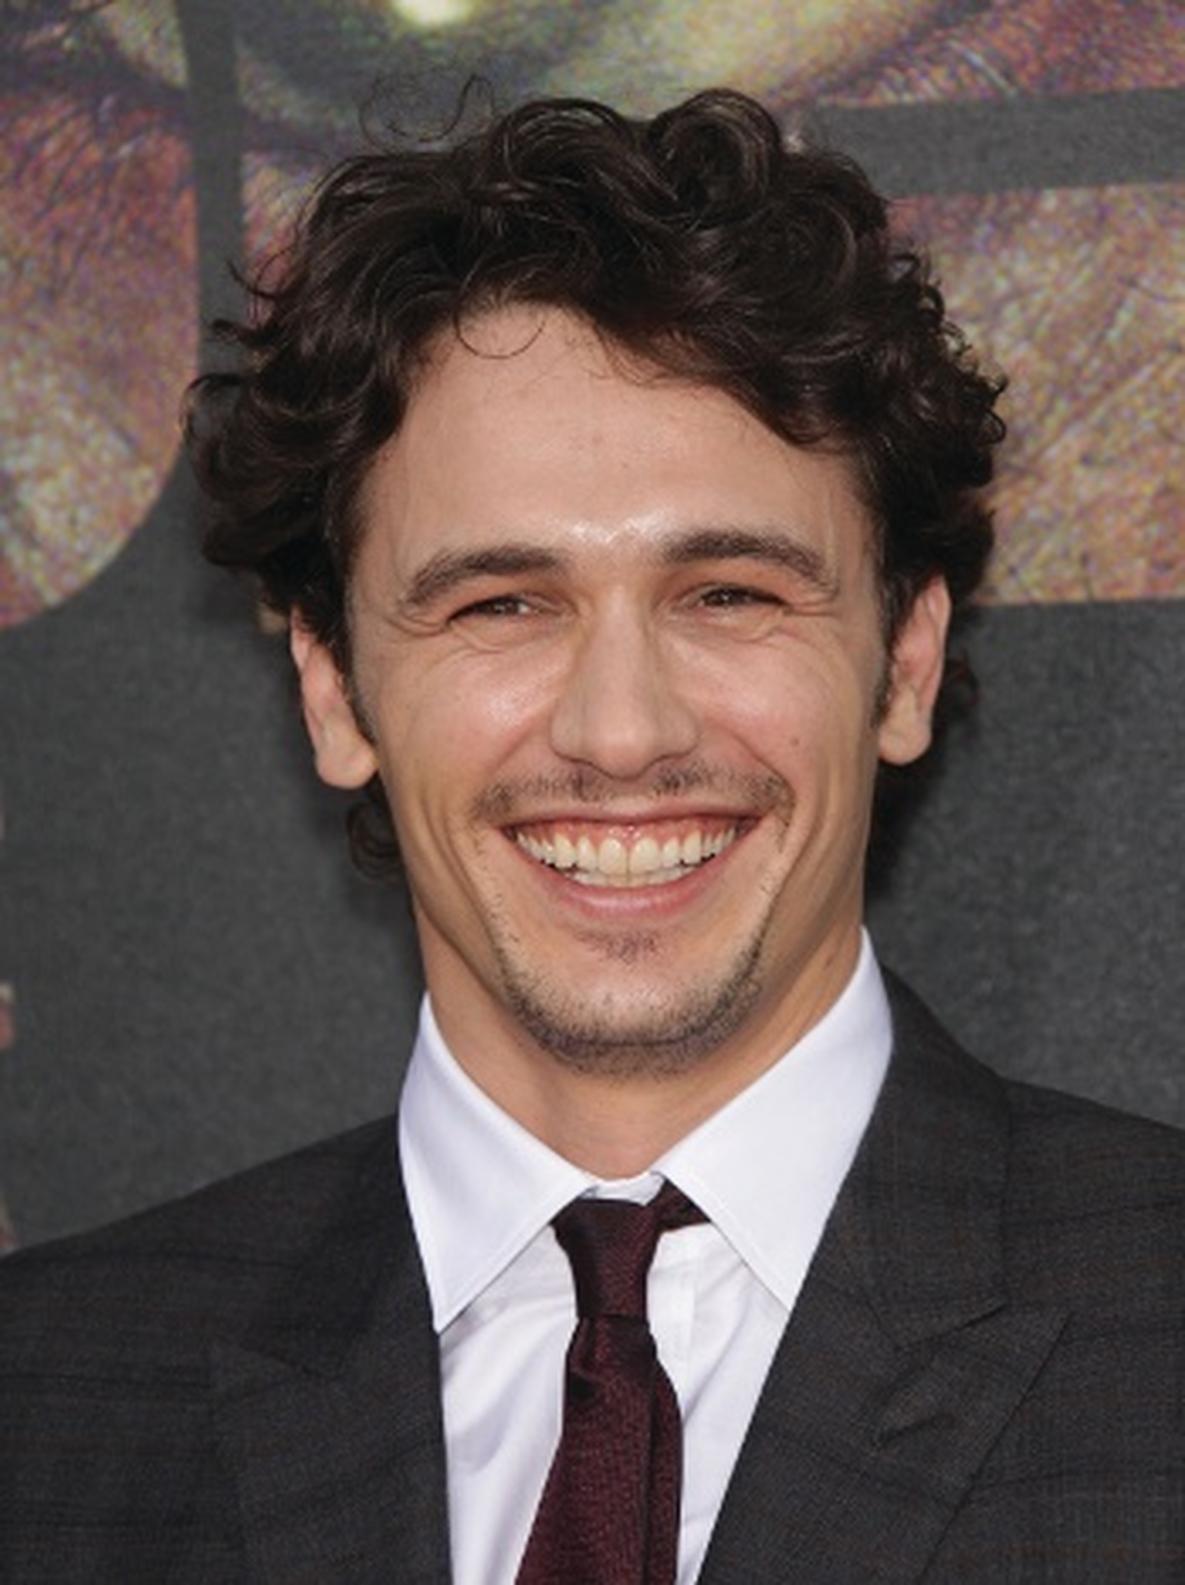 James Franco Says Class Is in Session